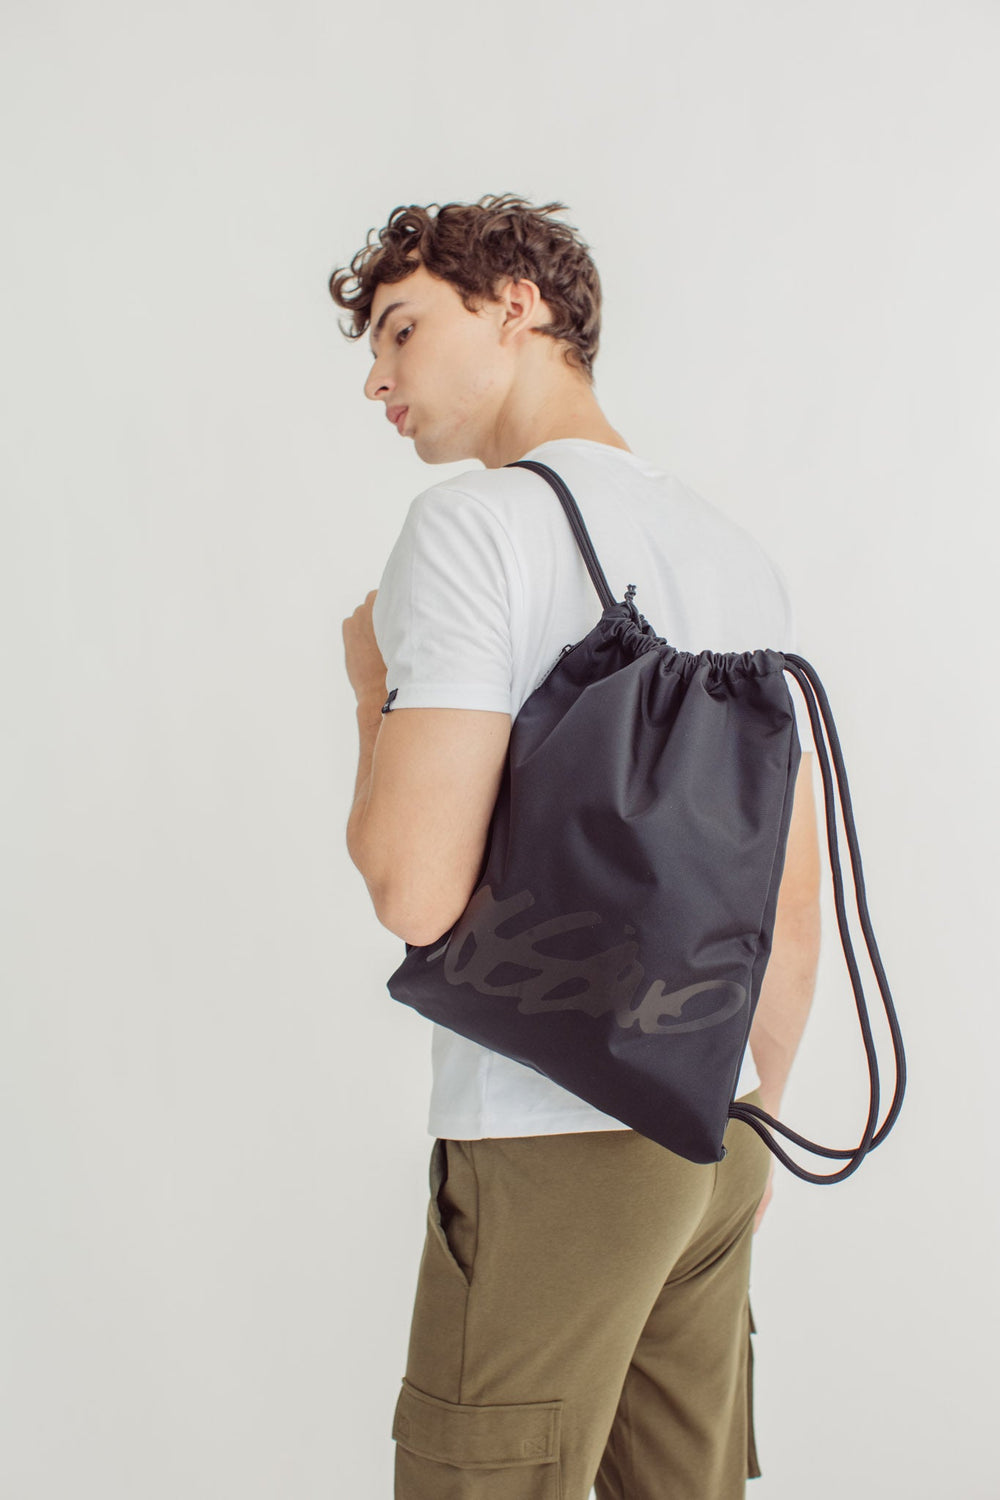 Kevin Mossimo Men's Back Pack - Mossimo PH